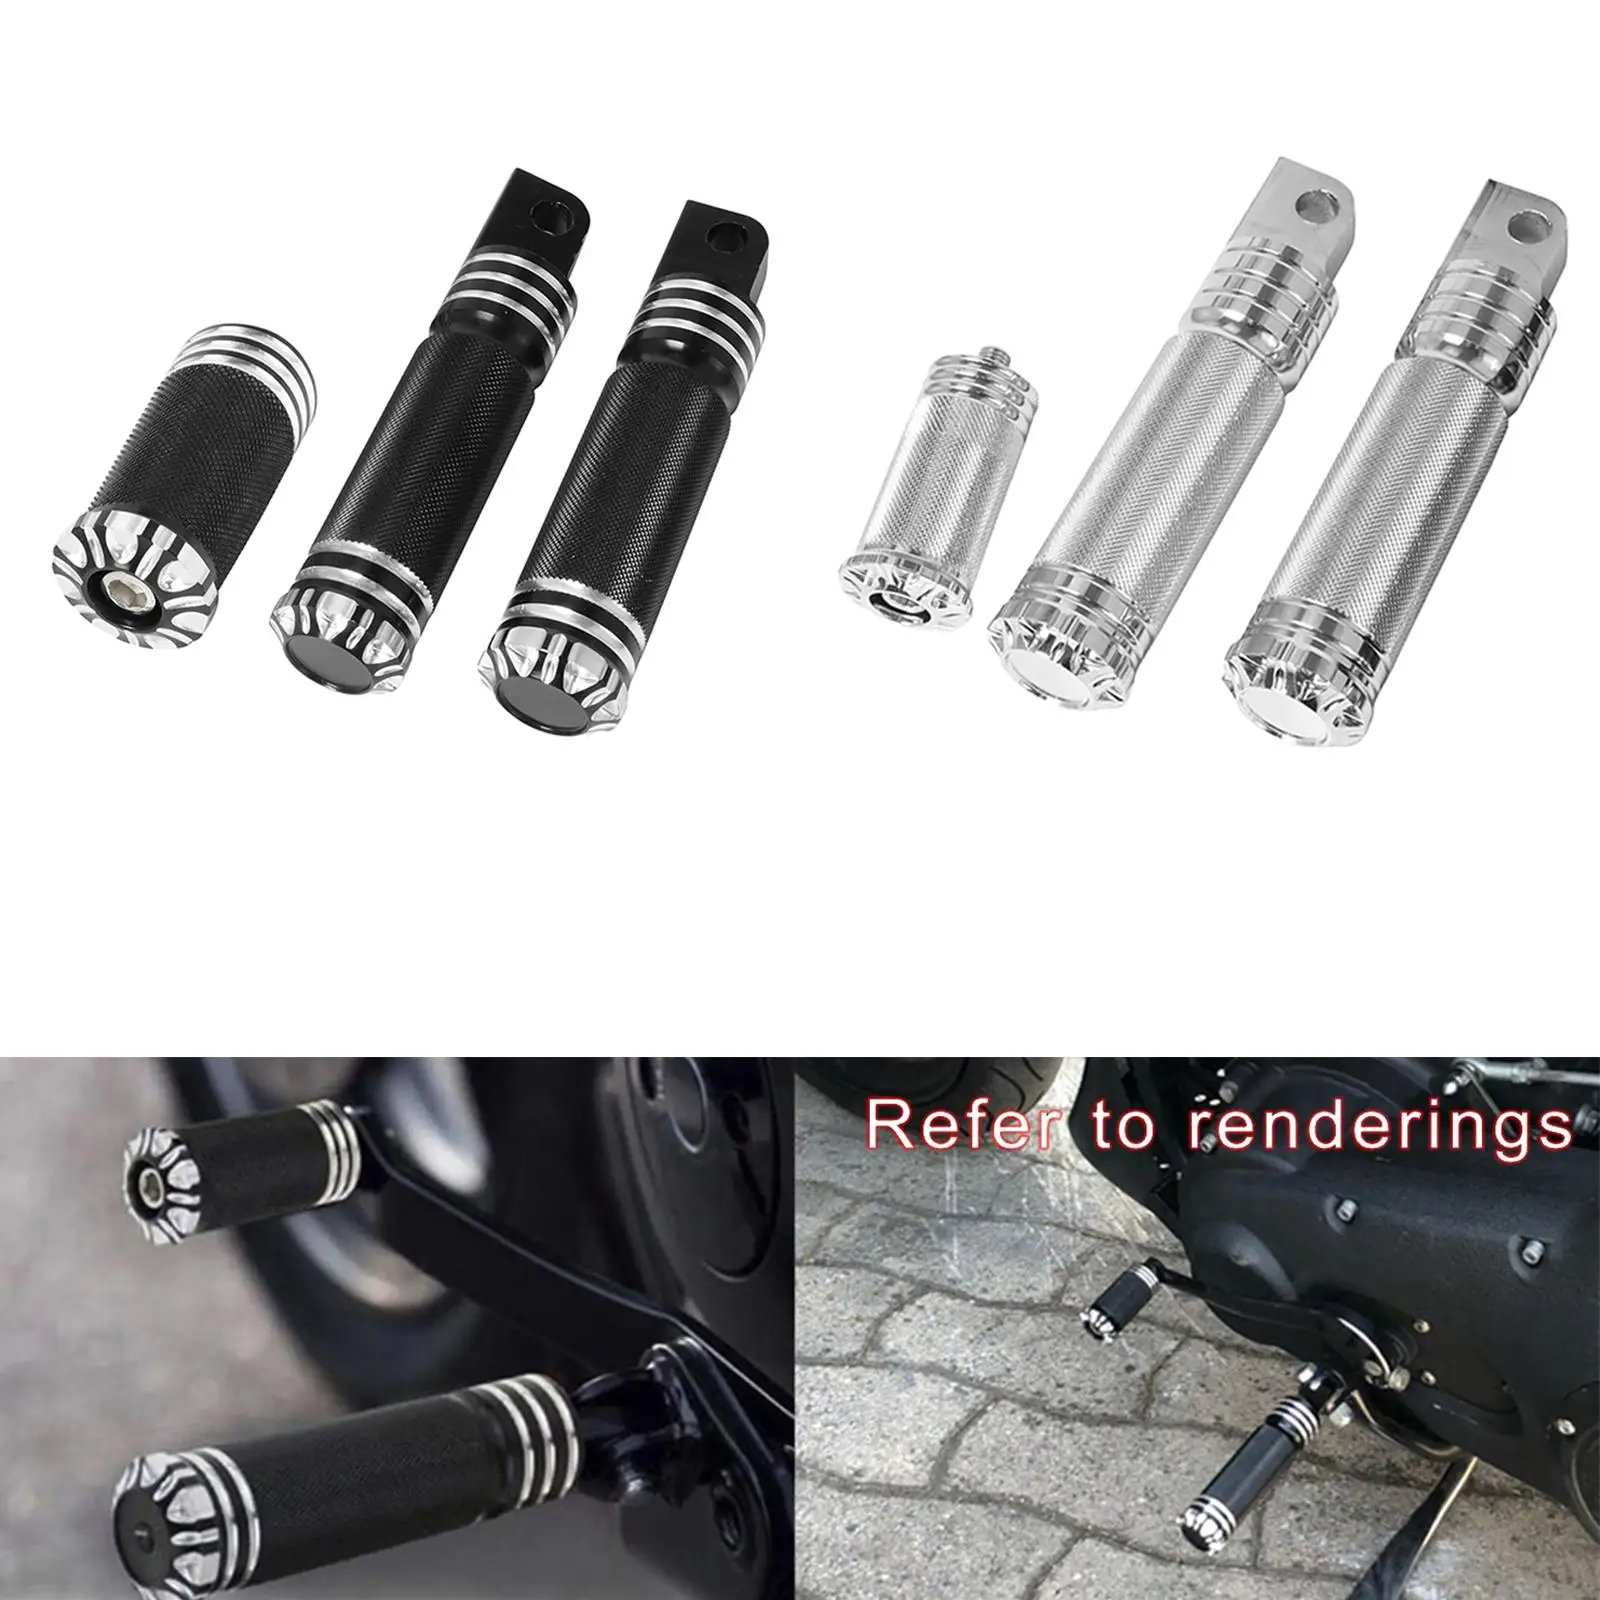 2 Piece Foot Pegs CNC Shifter Universal Easy to Install Aluminum Alloy for Harley XL883L XL1200C